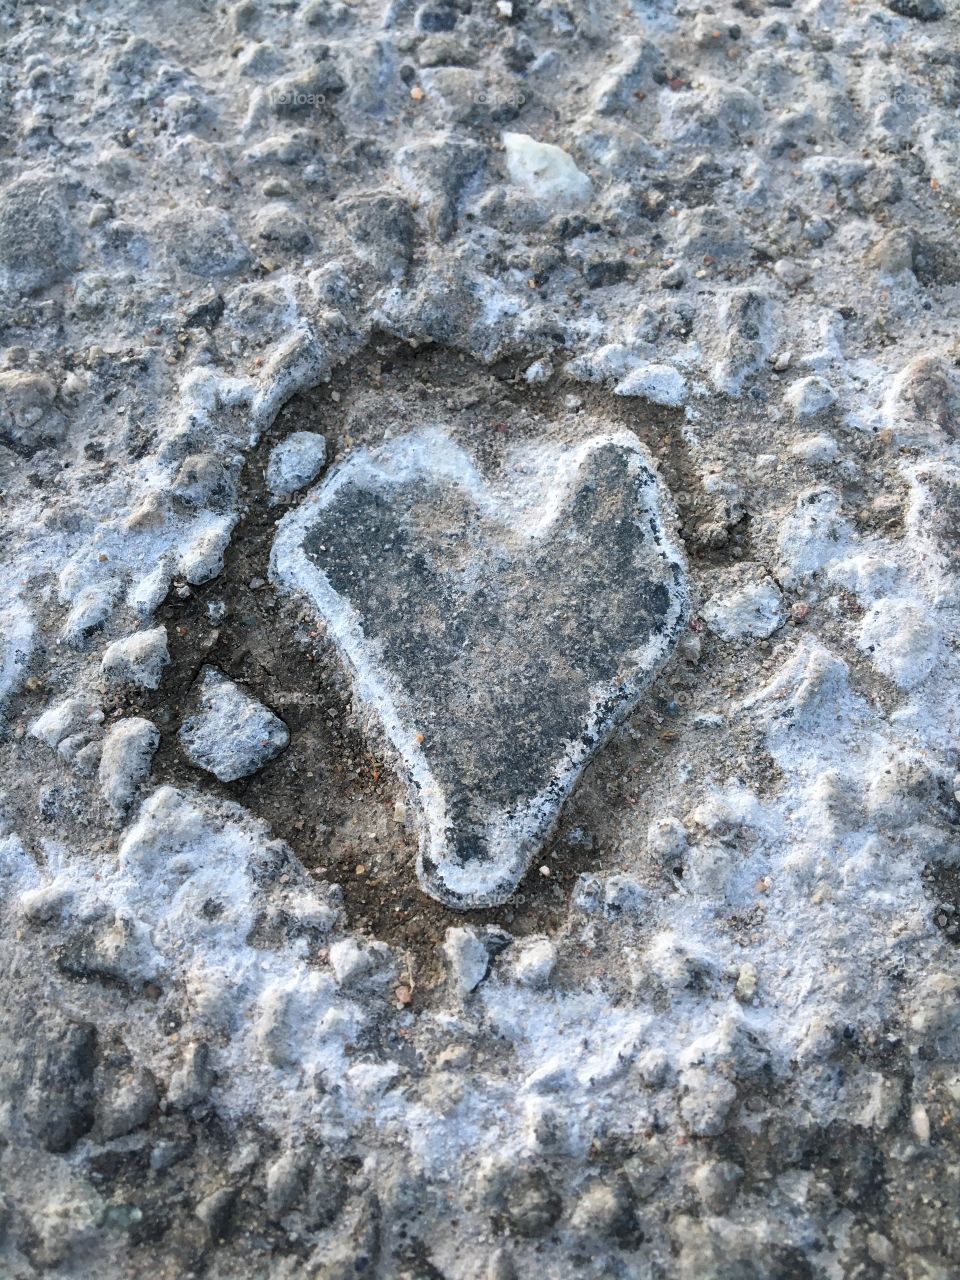 The heart of stone